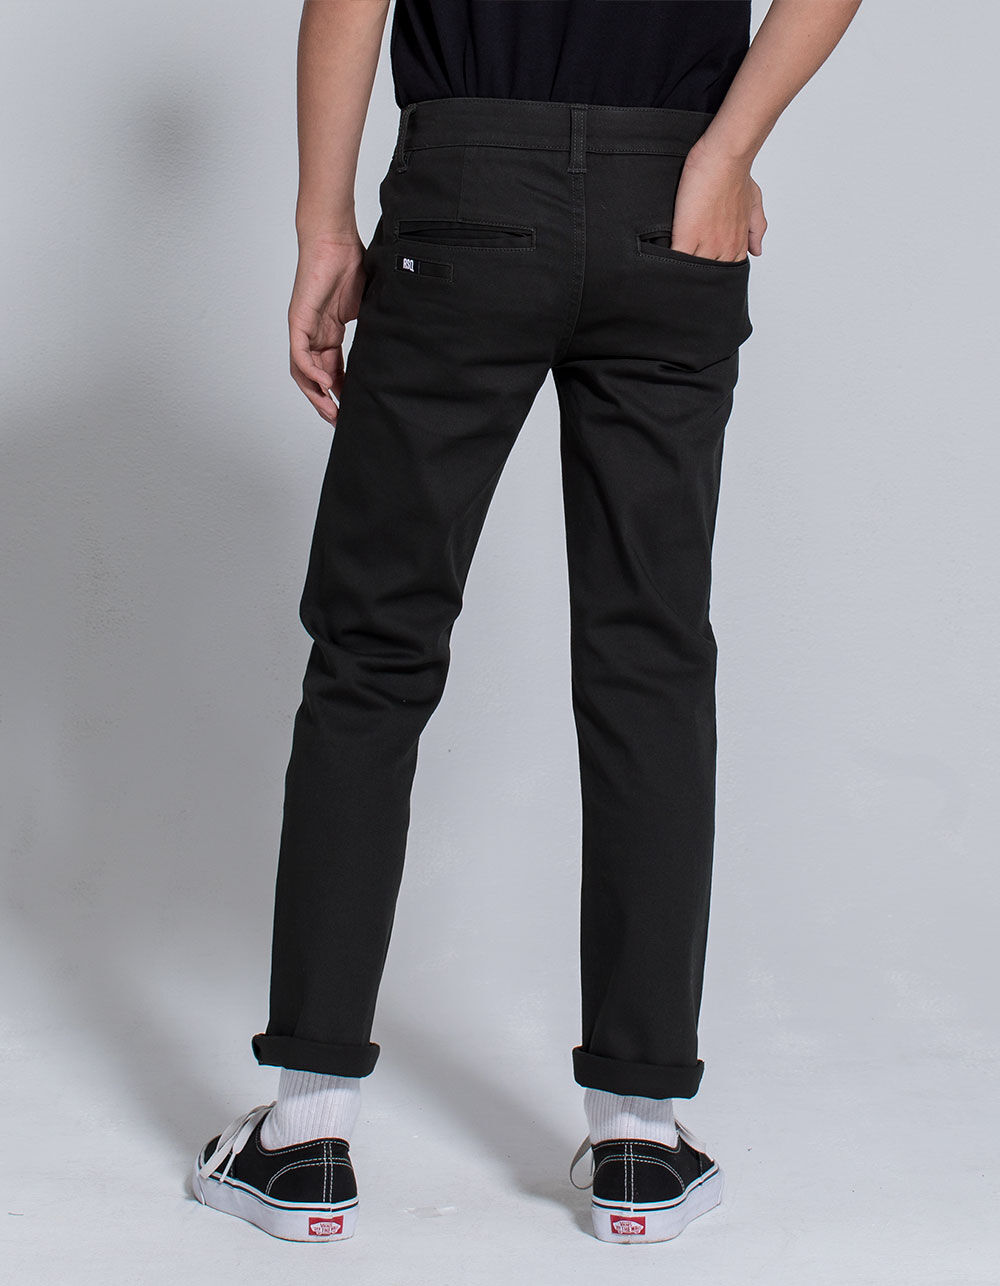 RSQ London Dark Olive Boys Skinny Chino Pants image number 3